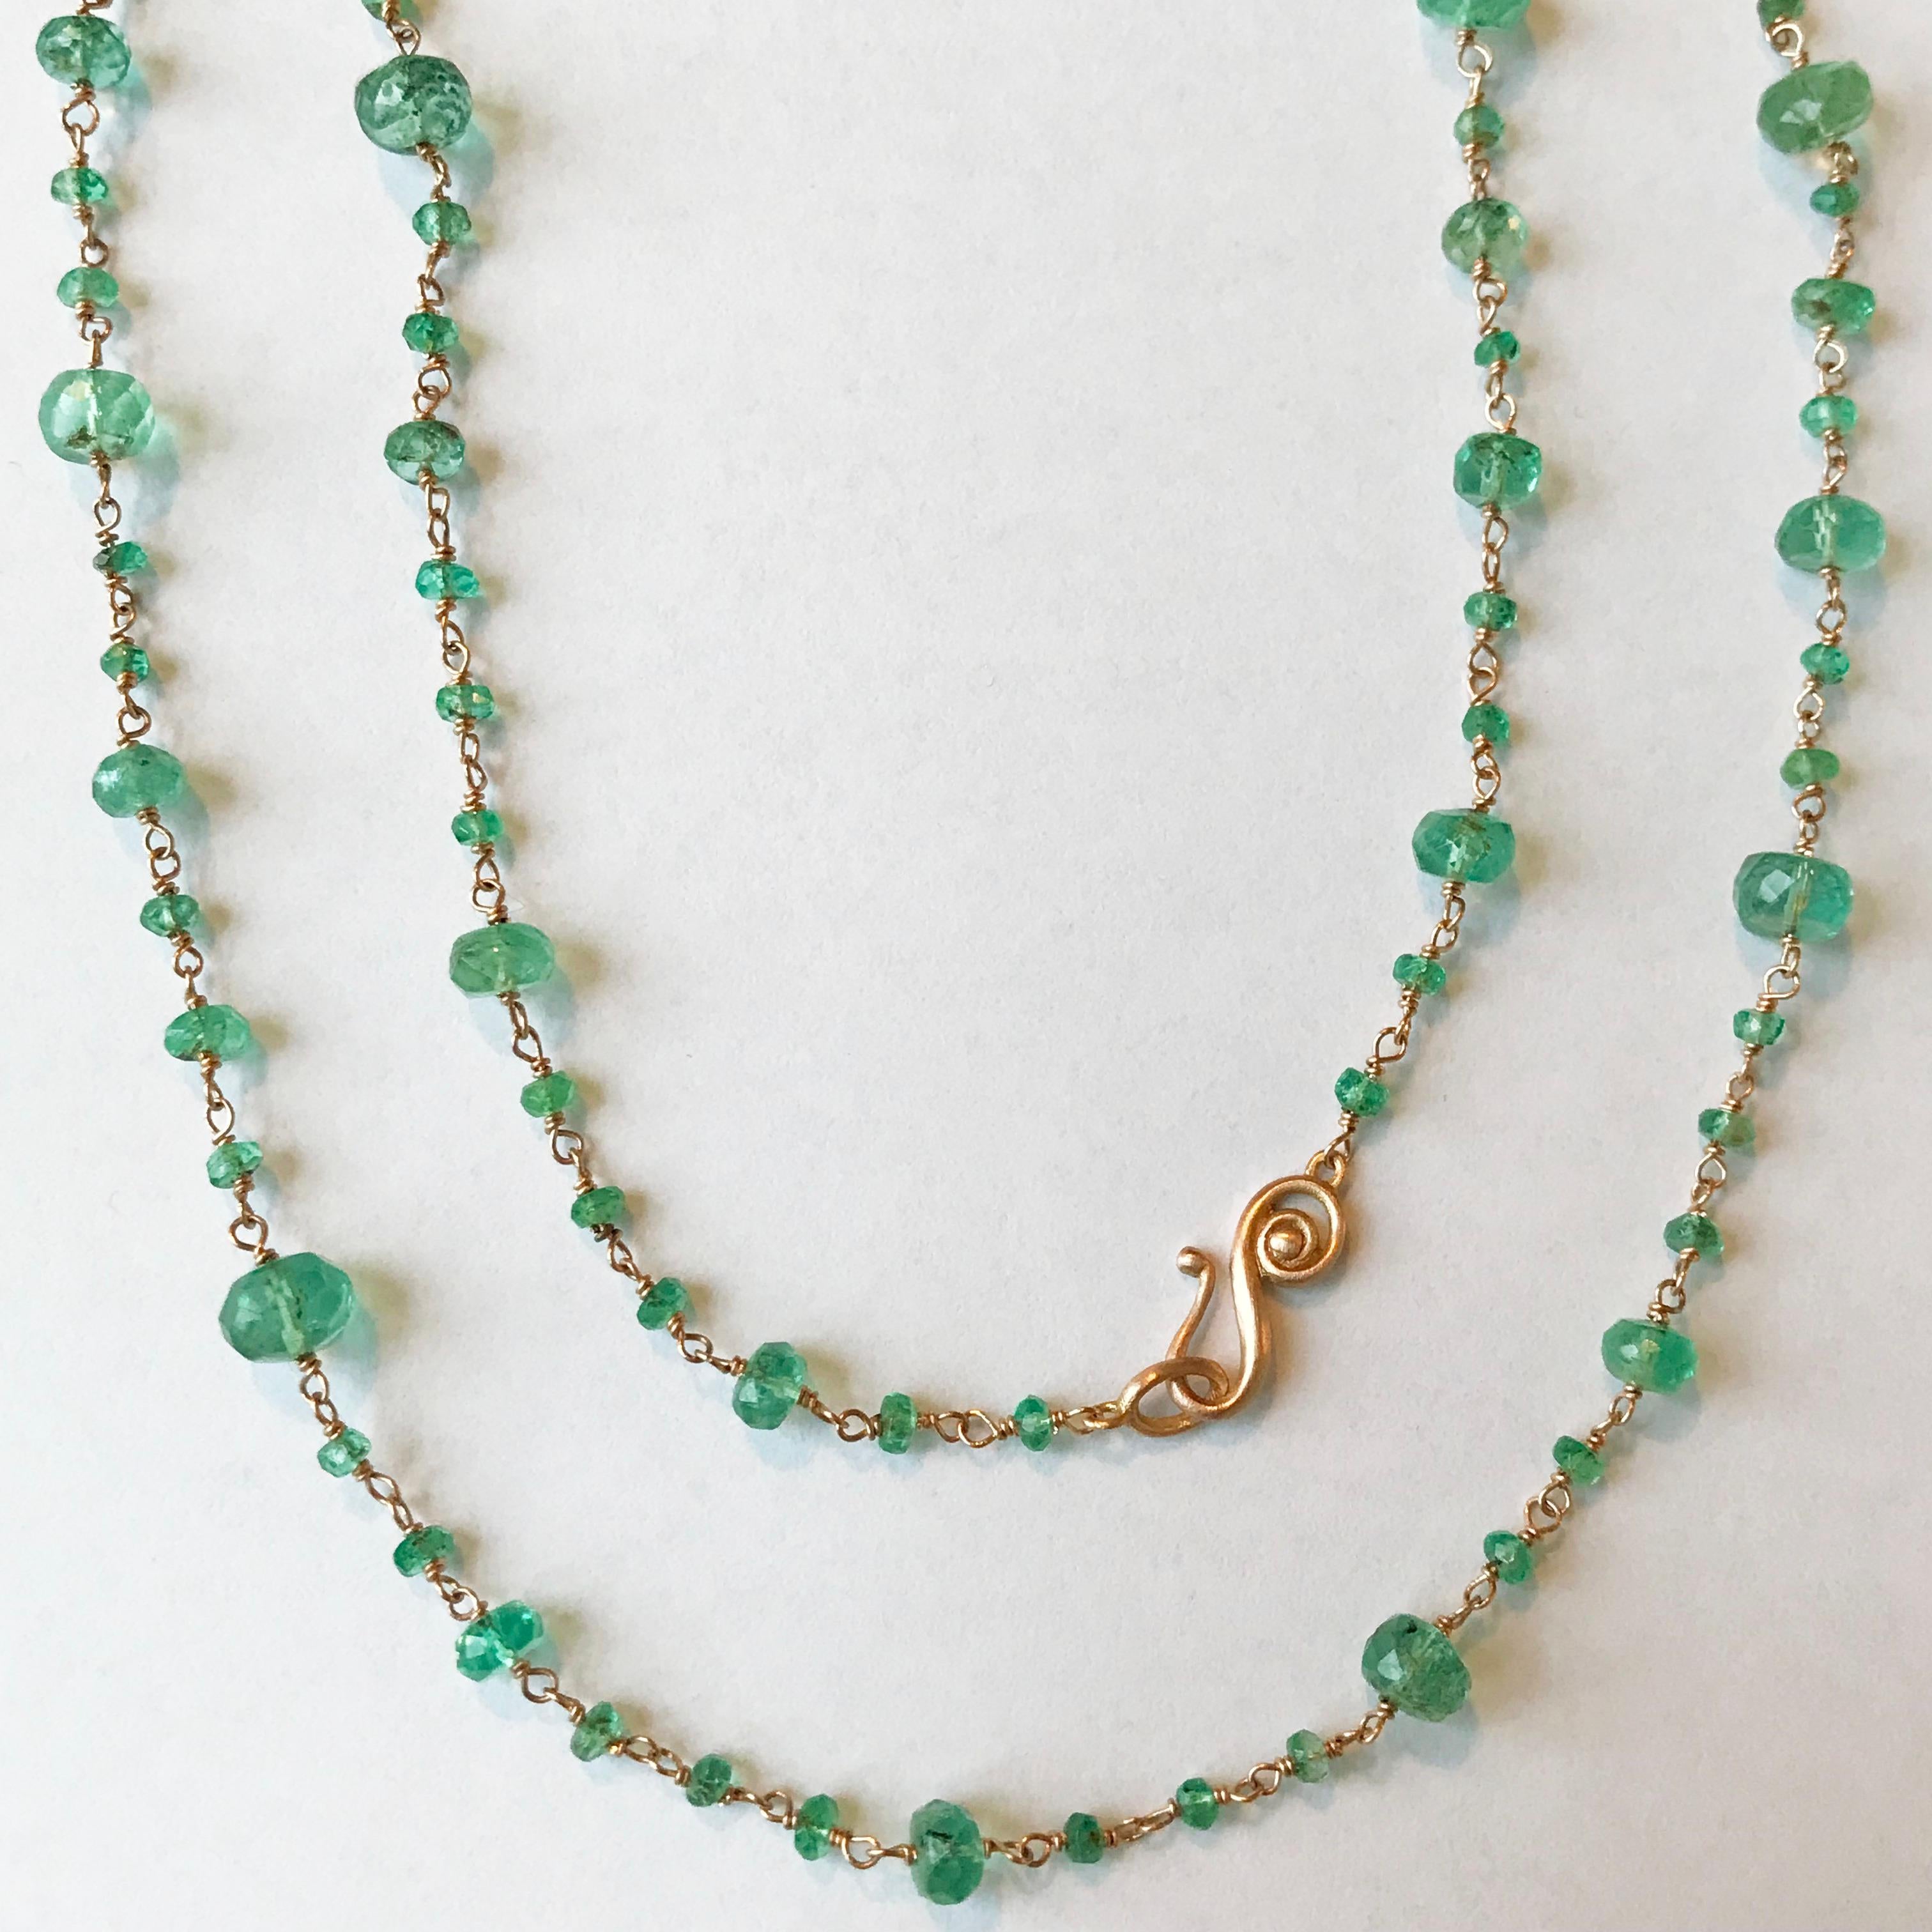 Contemporary Dalben Emerald Beads Rose Gold Necklace For Sale